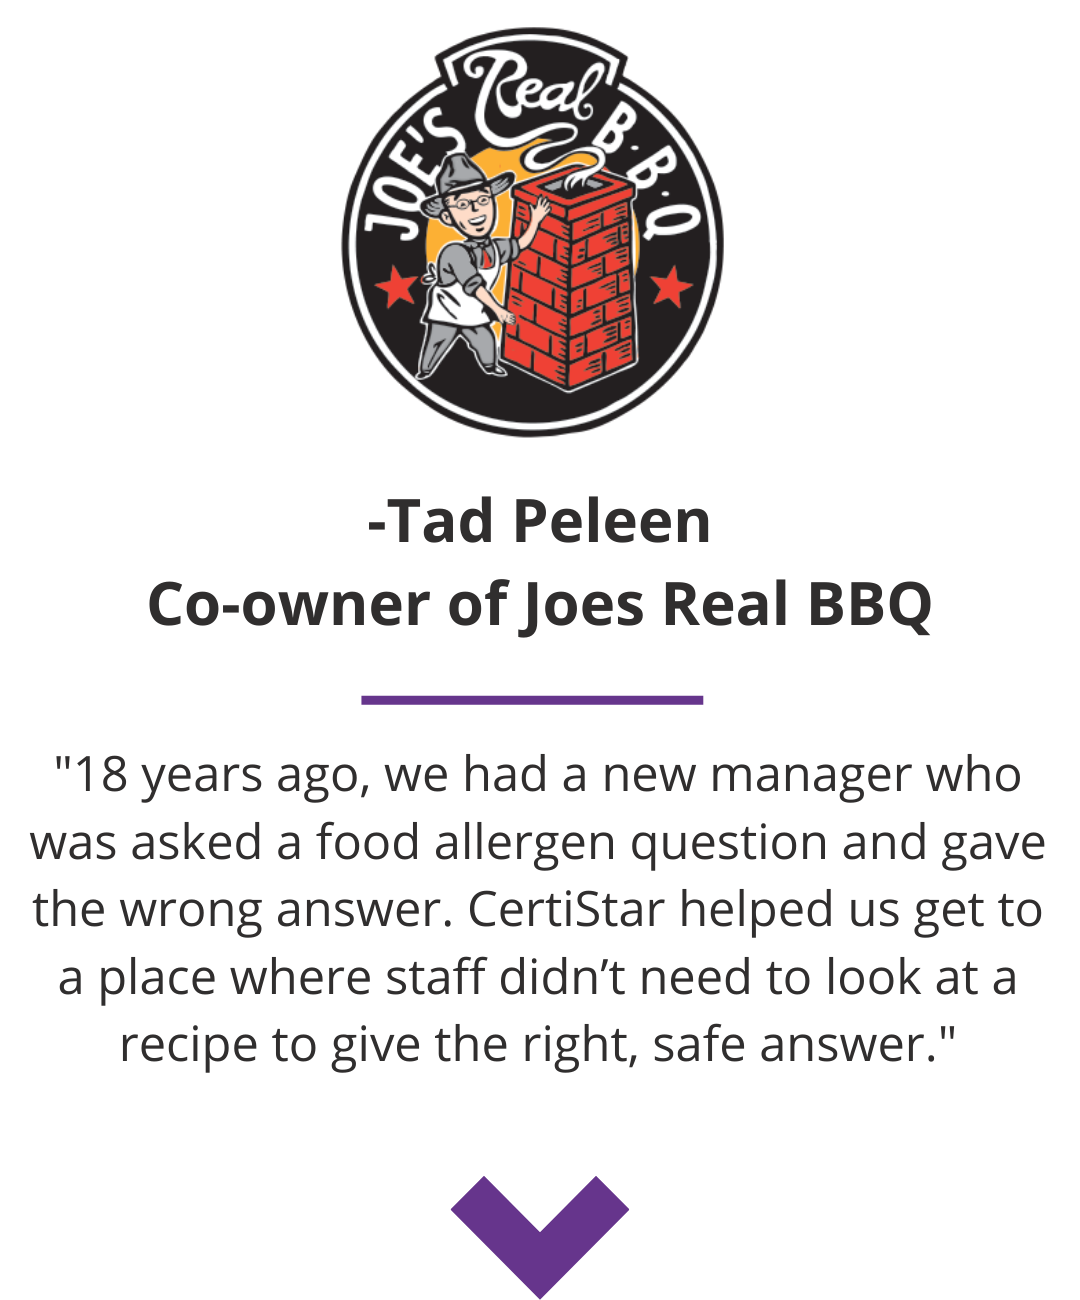 Joes Real BBB Quote CertiStar helped us get to a place where staff didn't need to look at a recipe to give the right, safe answer.